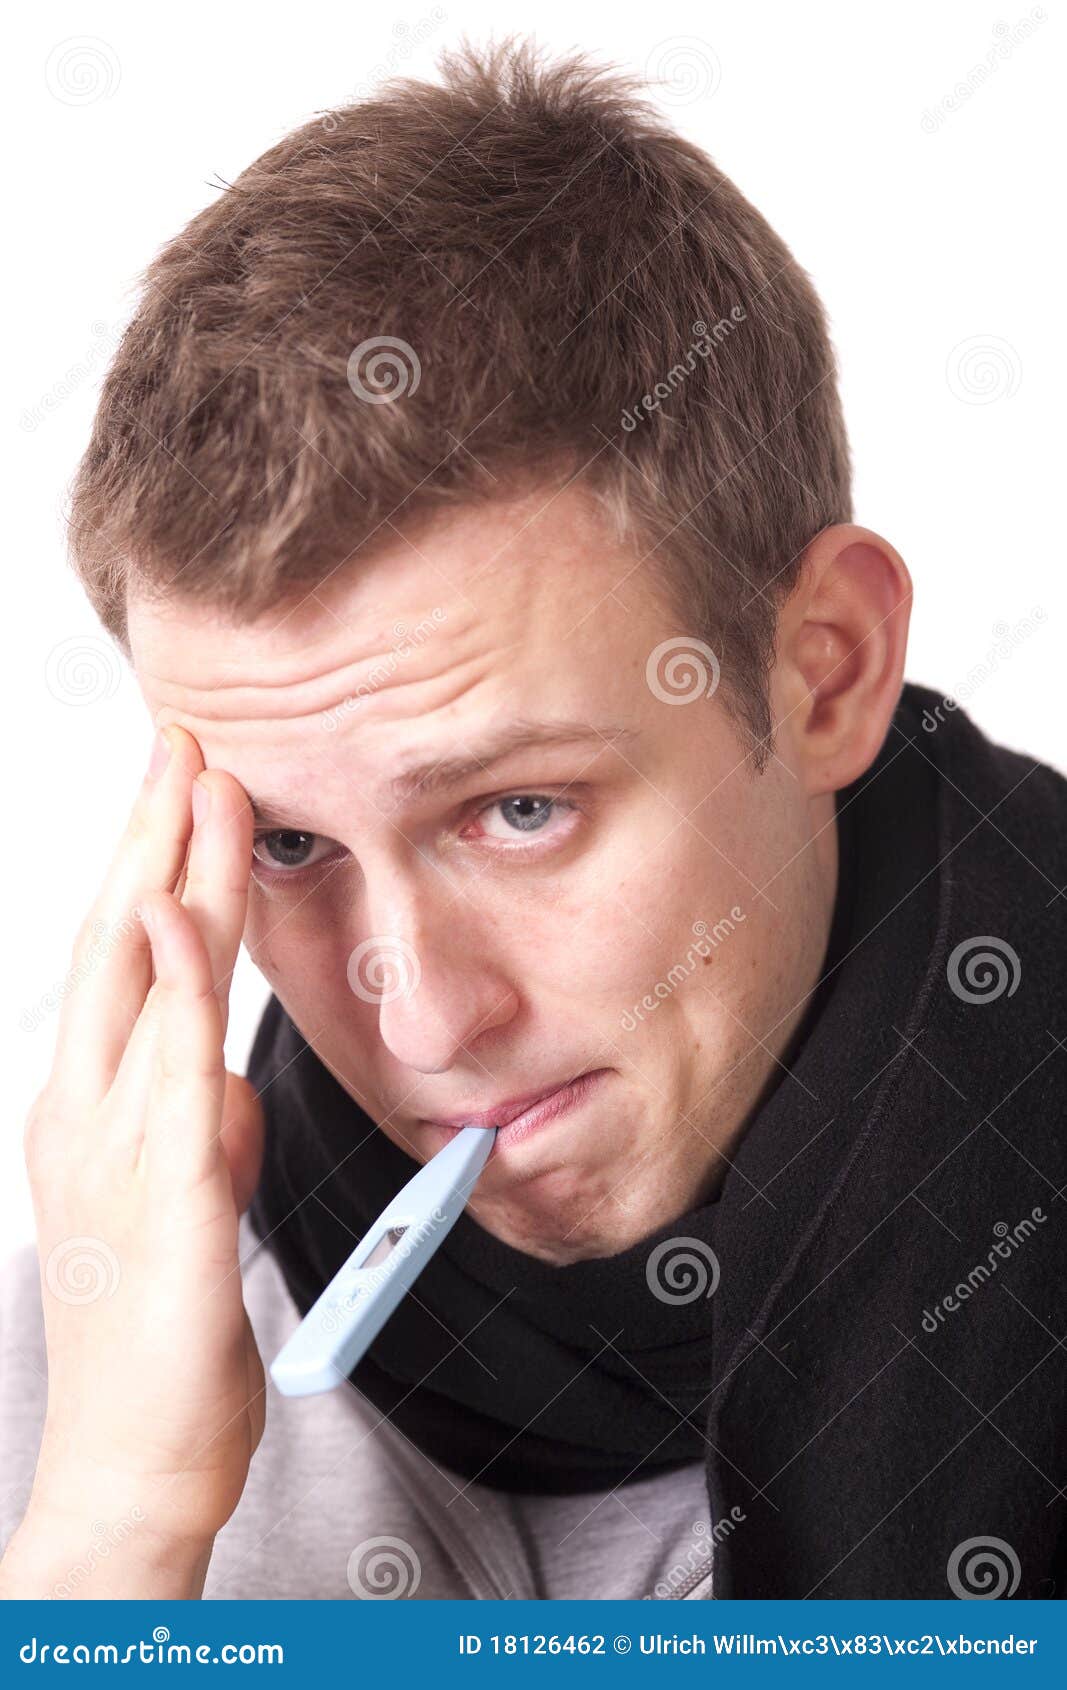 Image result for images of man feeling sick